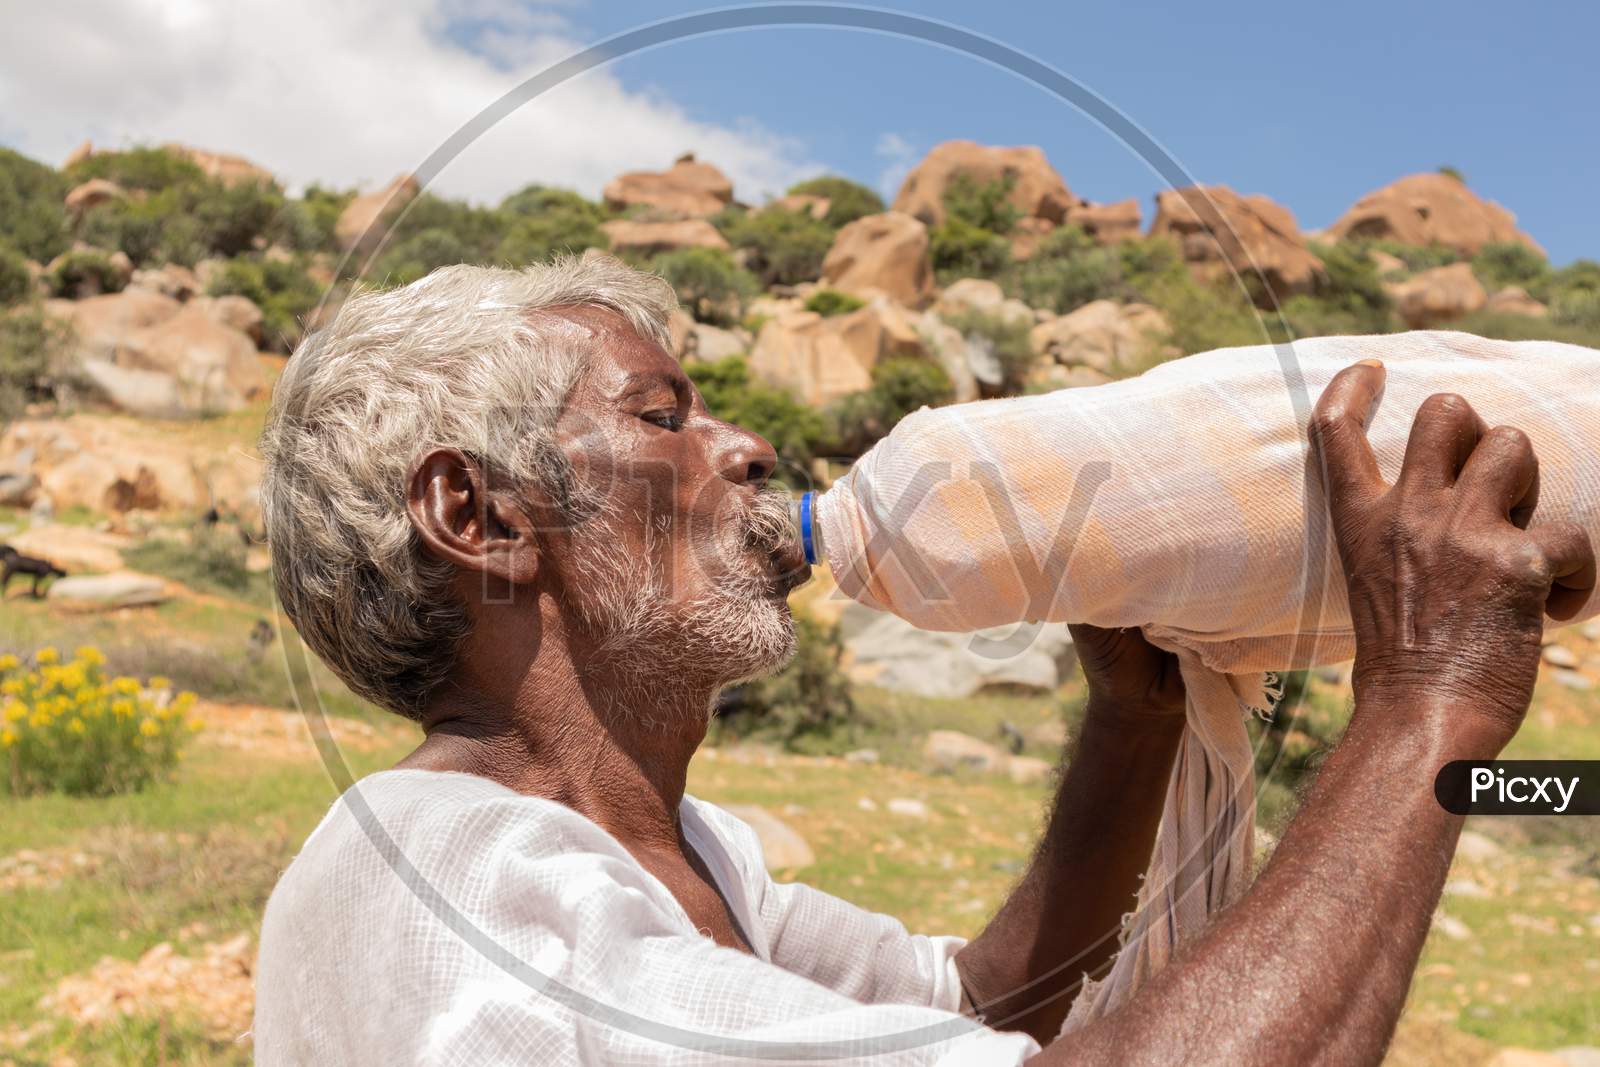 Close Up Of Thirsty Farmer Man Drinking Water From Plastic Bottle Covered With Cloth For Cooling During Hot Sunny Day.